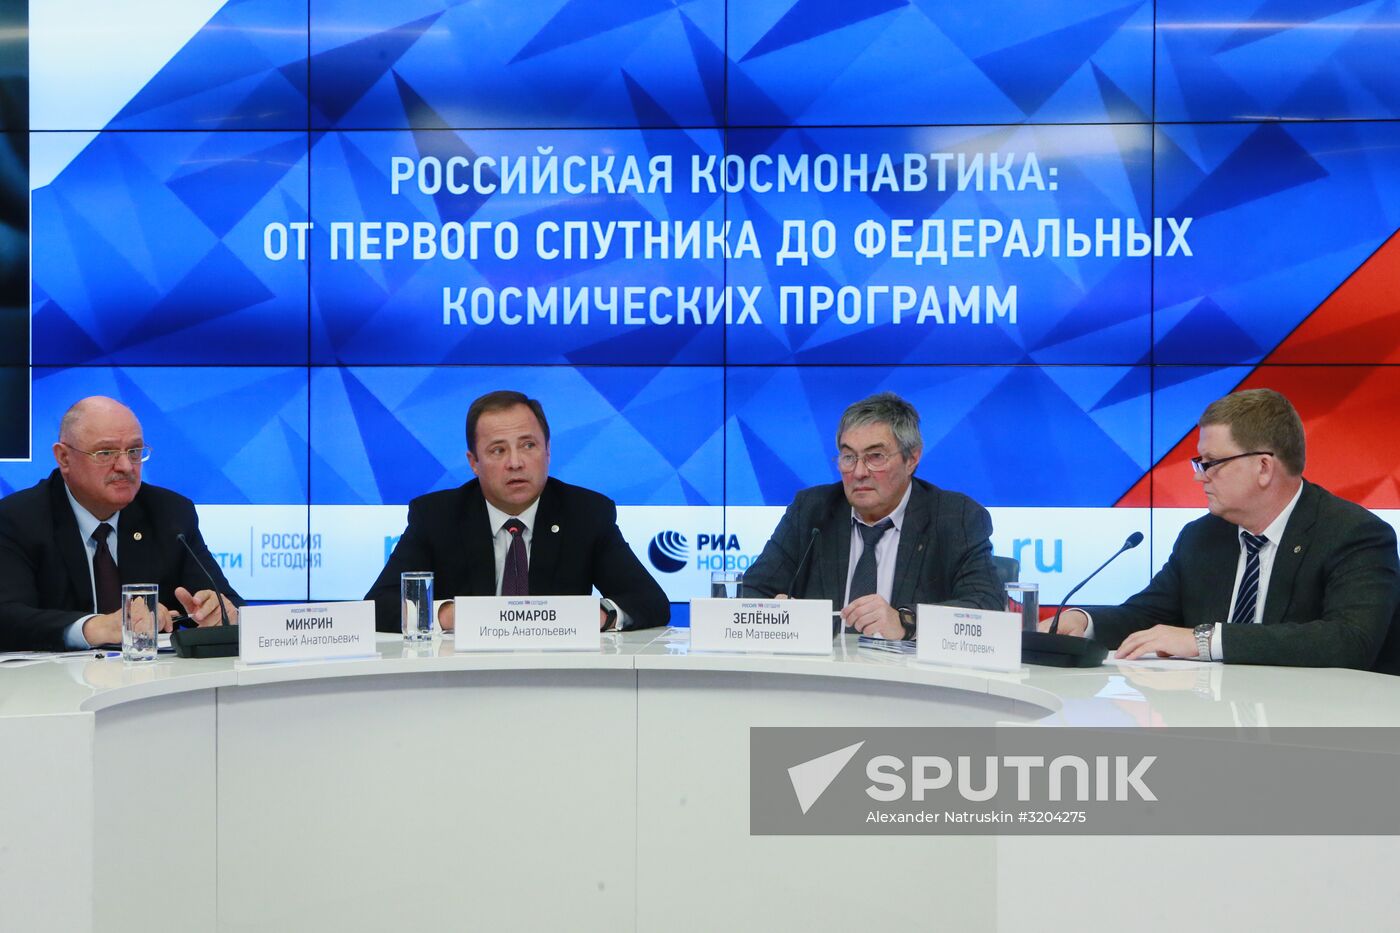 News conference Russian cosmonautics: From the first satellite to federal space programs